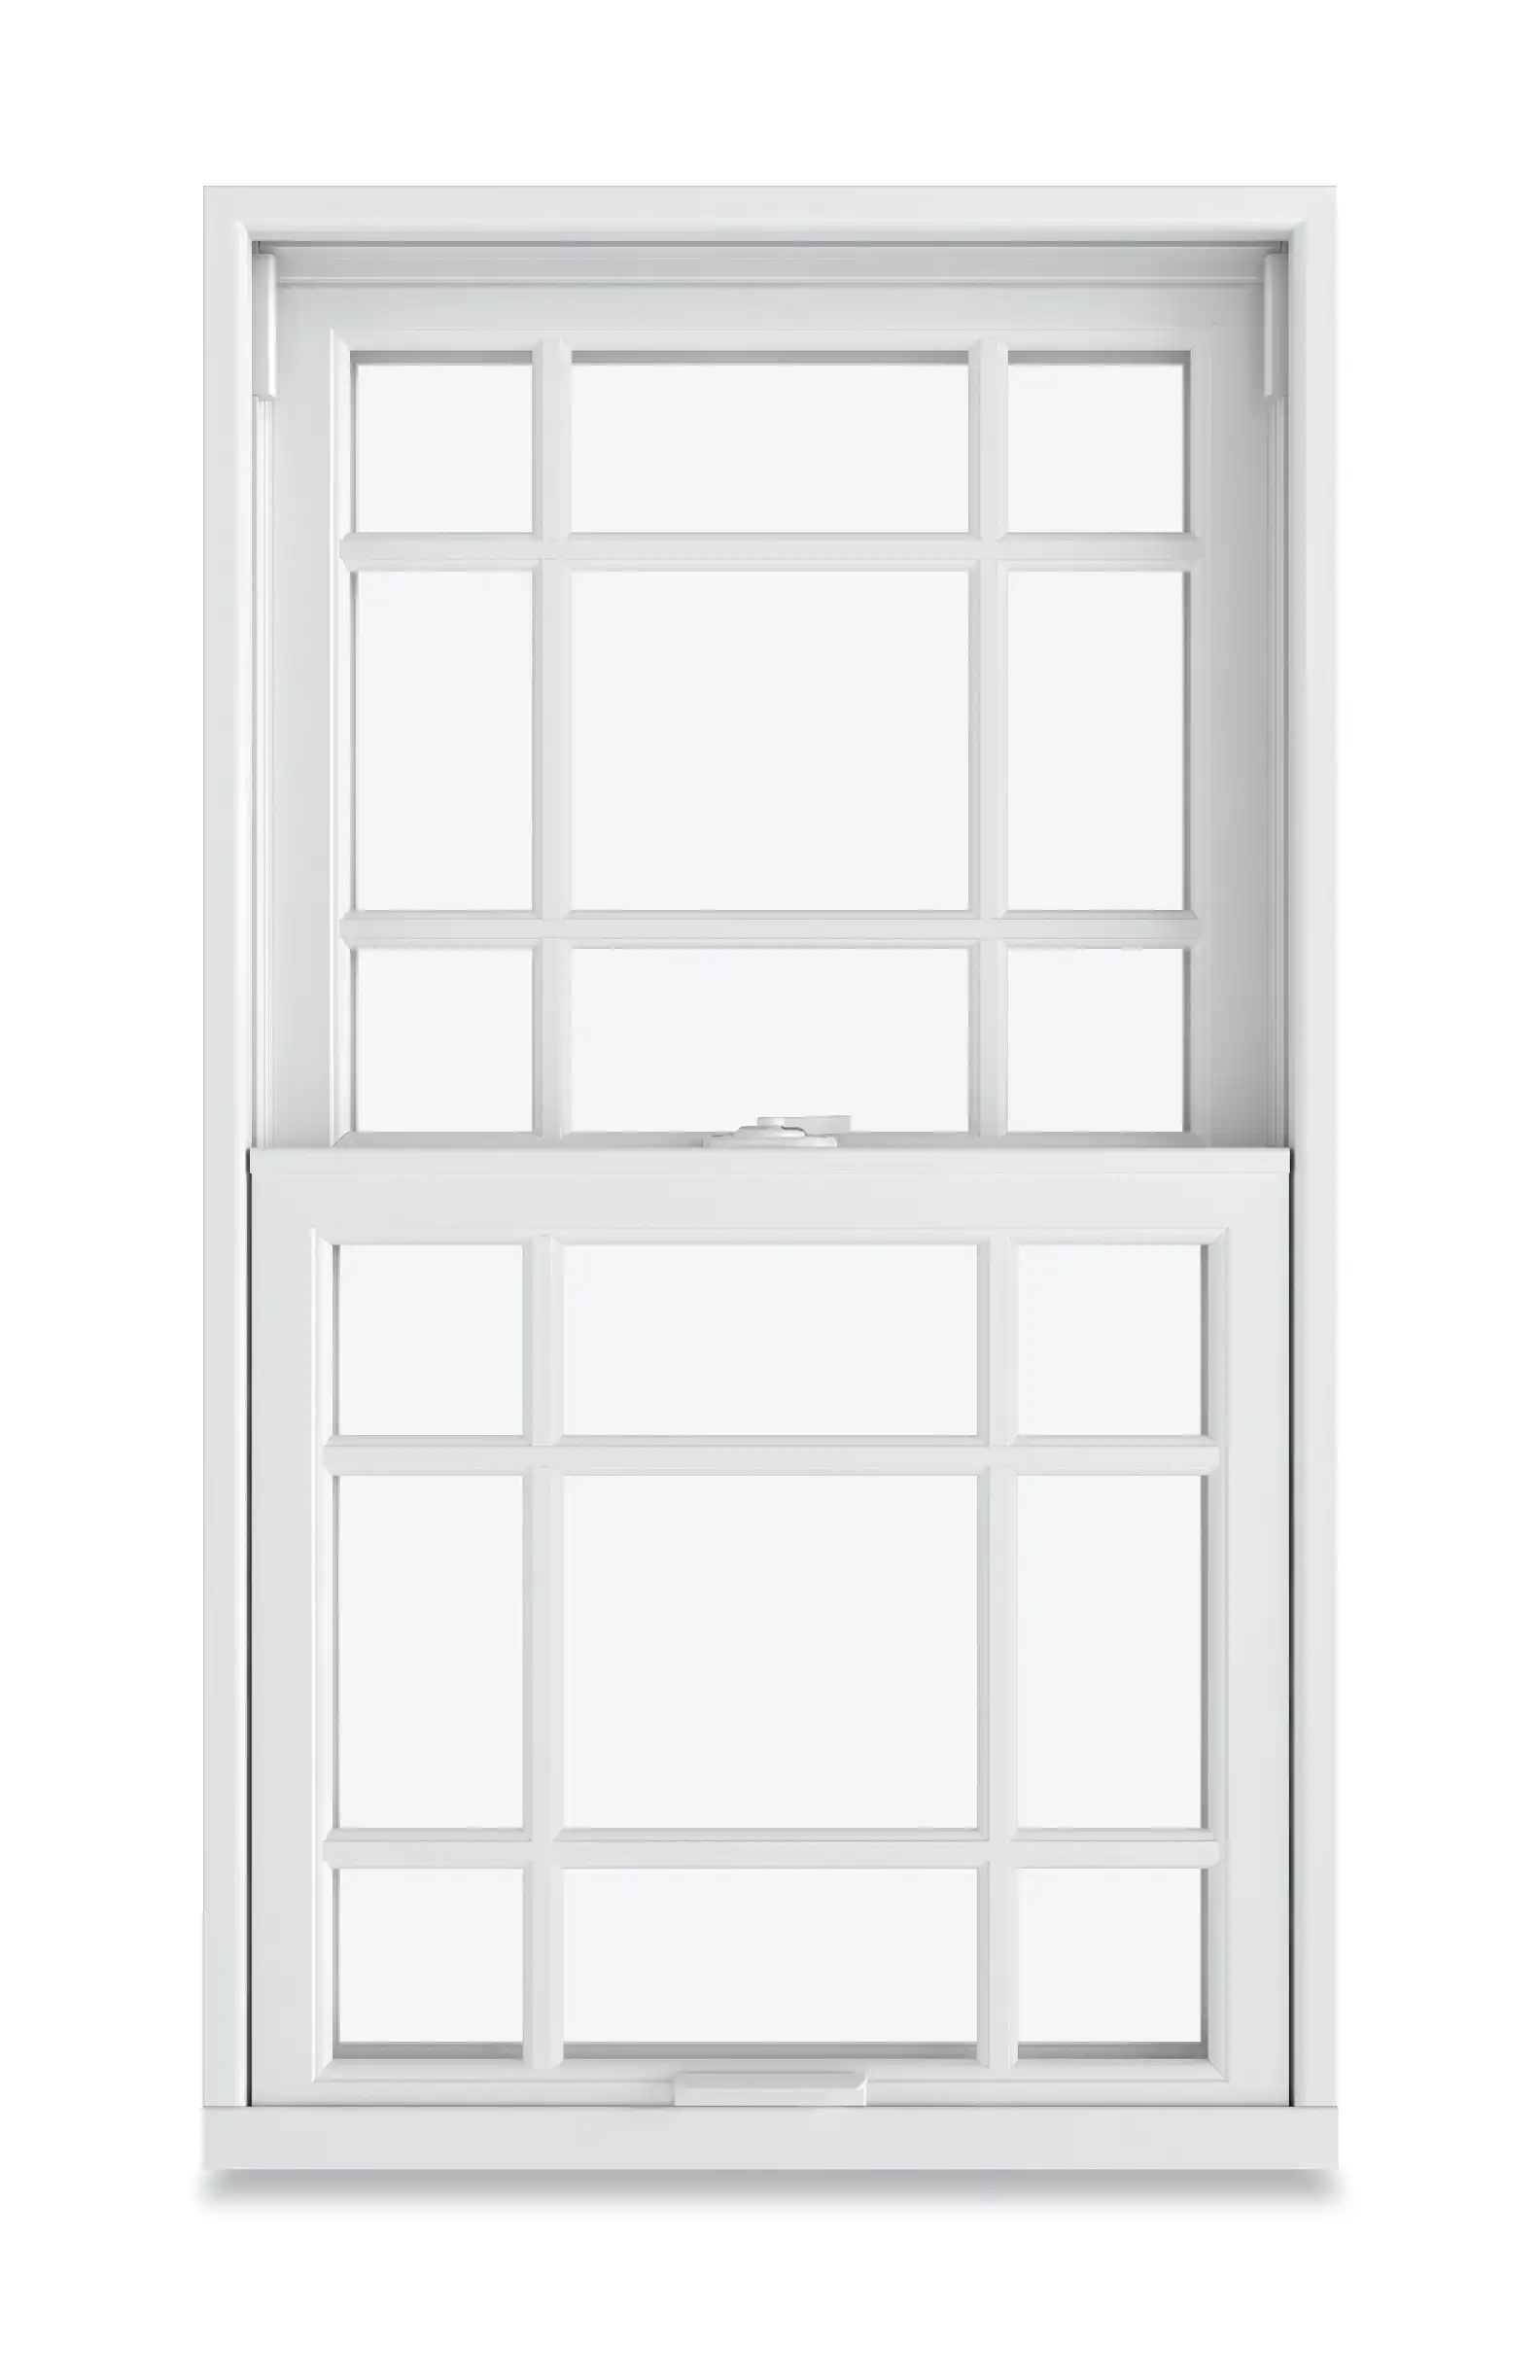 A white Marvin Replacement Double Hung window with a prairie style 9-lite pattern.